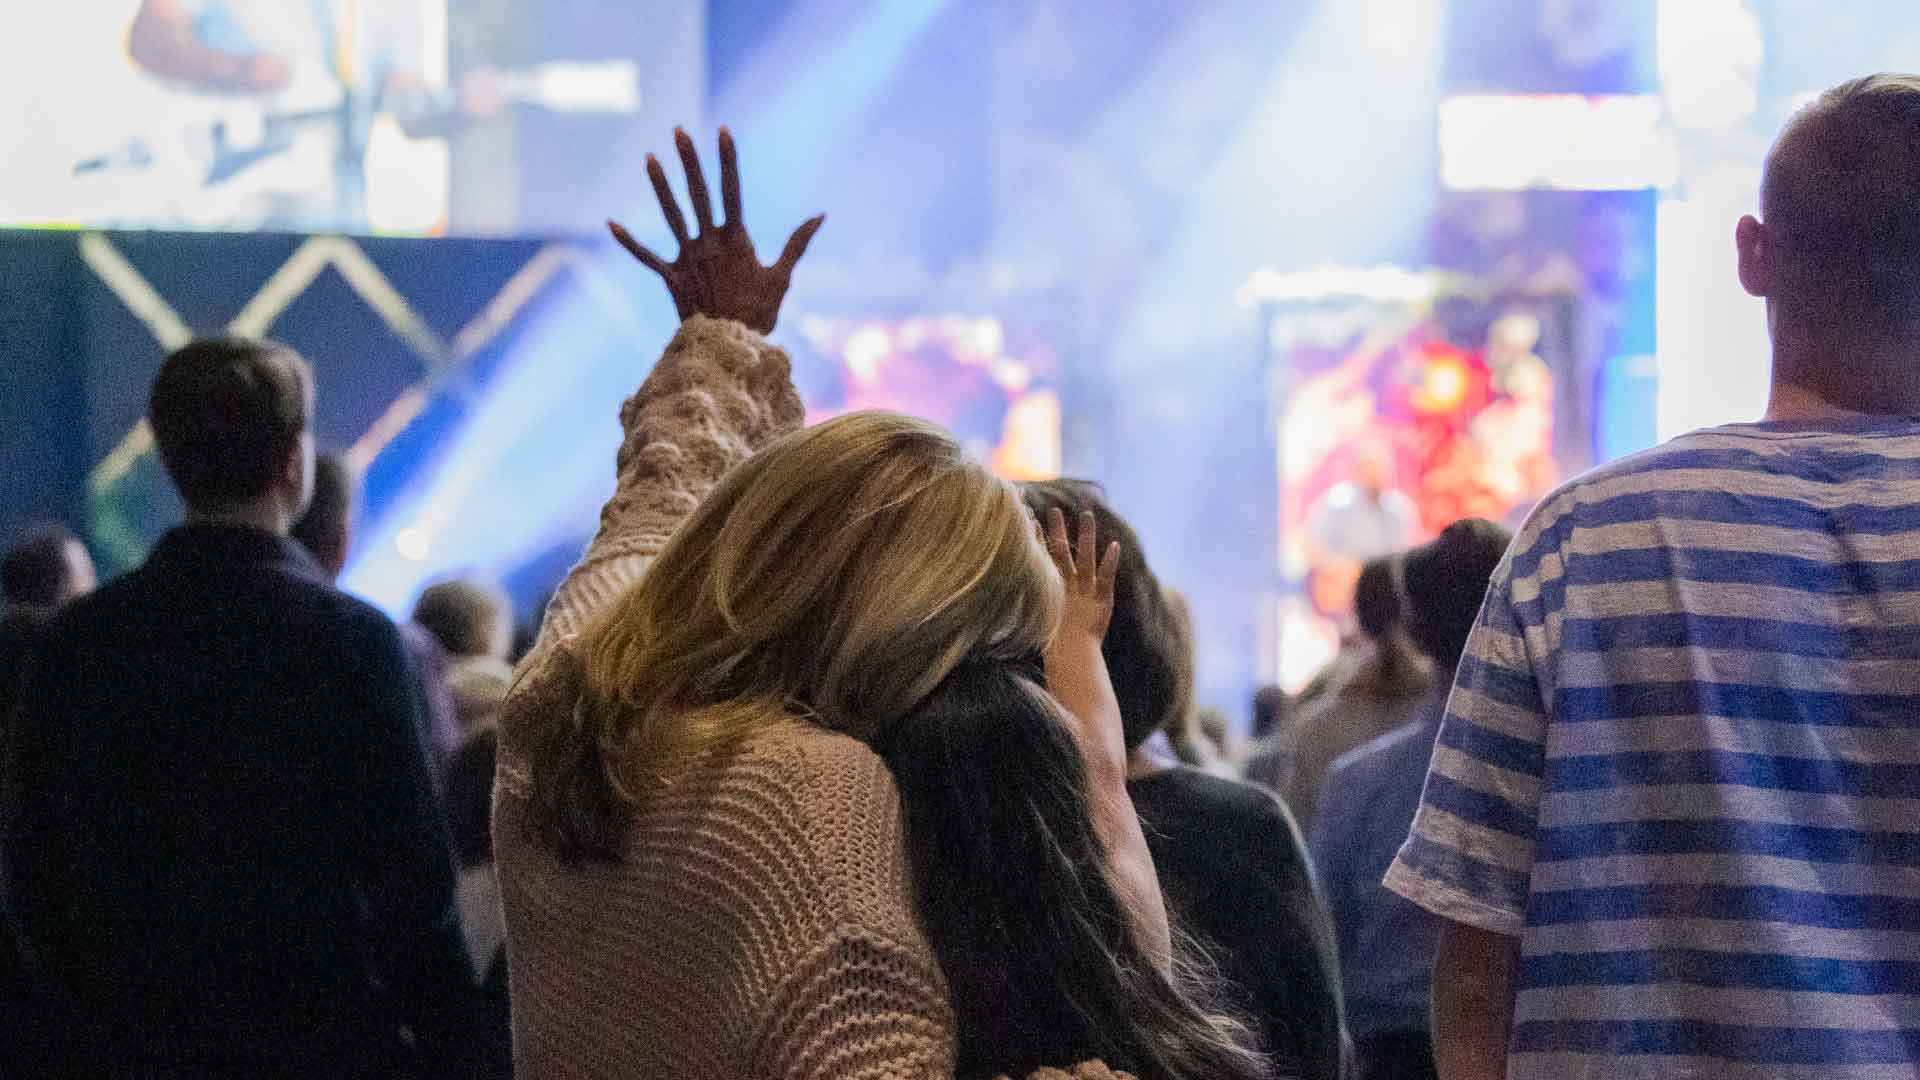 mother and daughter with hands raised worshiping